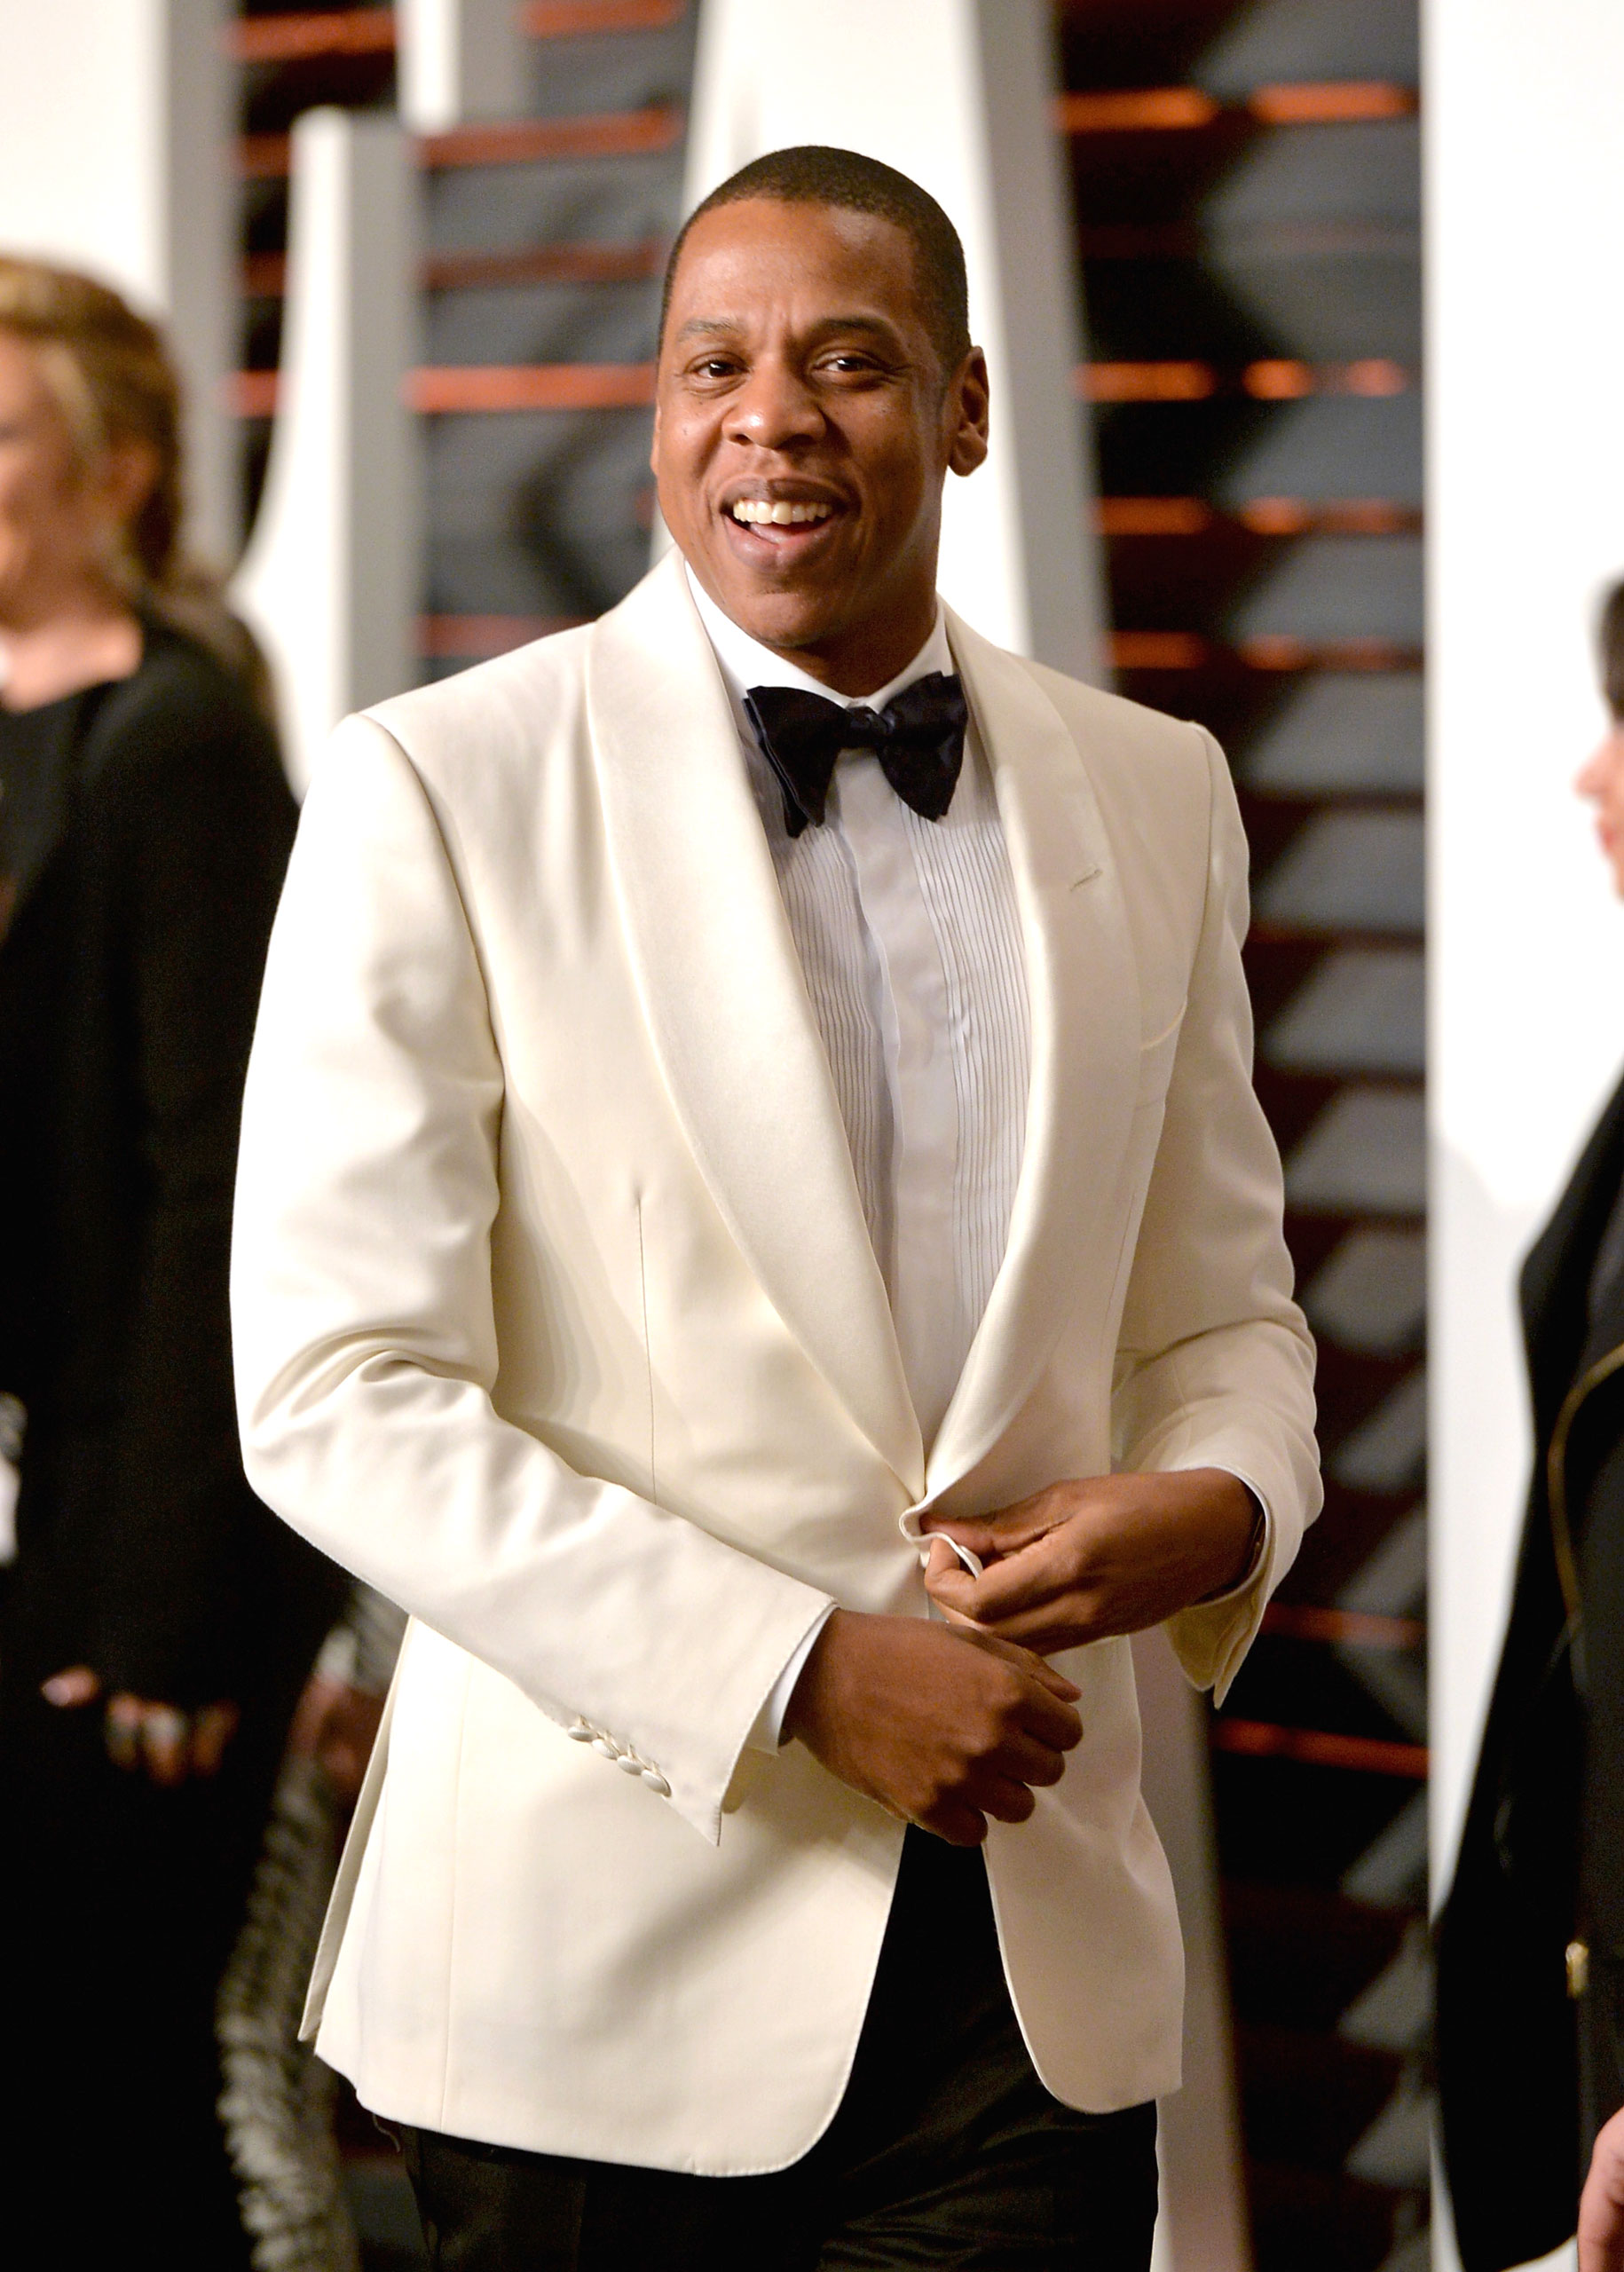 Jay Z: Tidal Hosting B-Sides Concert and Playlist Contest